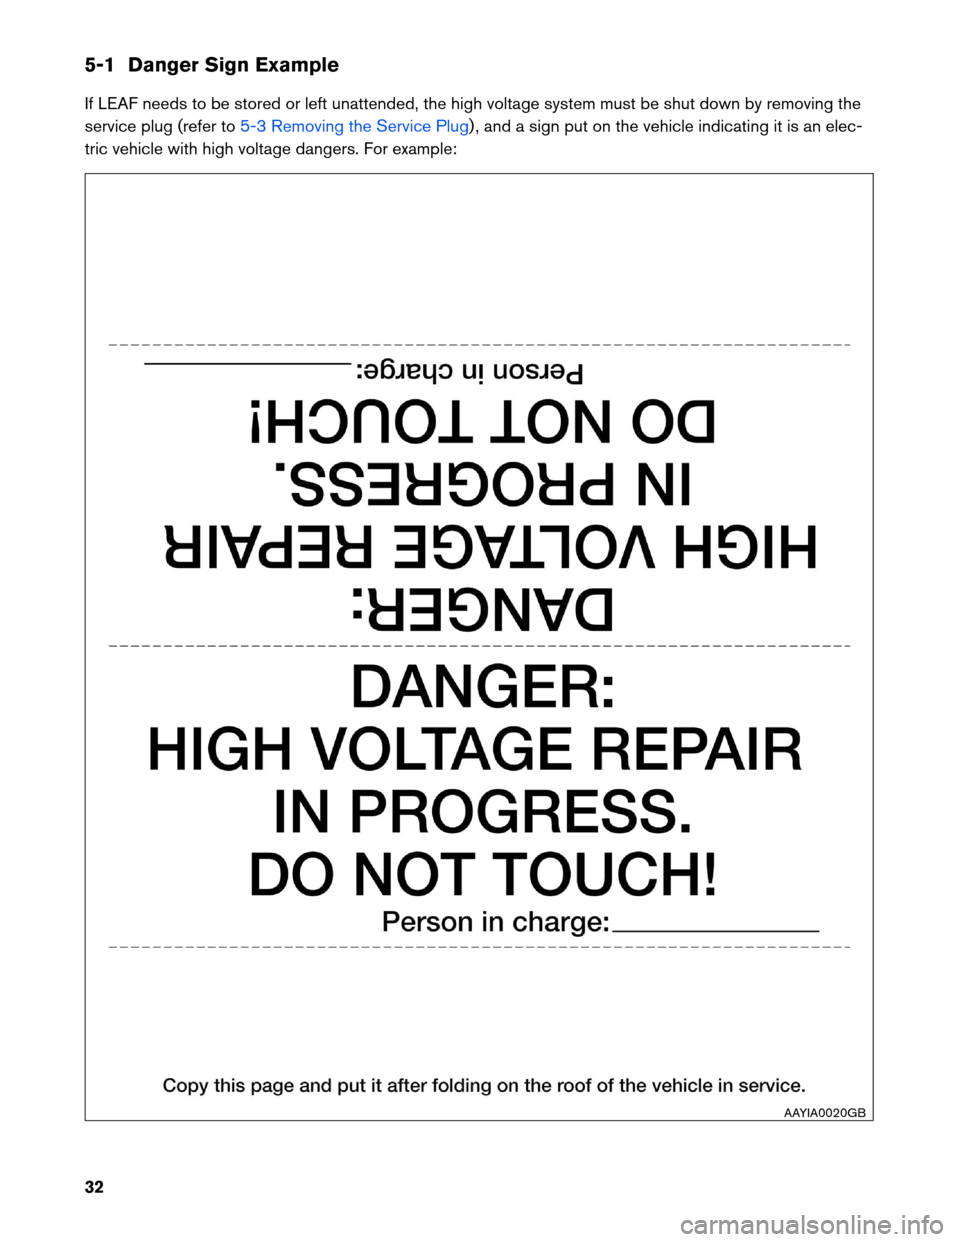 NISSAN LEAF 2013 1.G Roadside Assistance Guide 5-1 Danger Sign Example
If
LEAF needs to be stored or left unattended, the high voltage system must be shut down by removing the
service plug (refer to 5-3 Removing the Service Plug) , and a sign put 